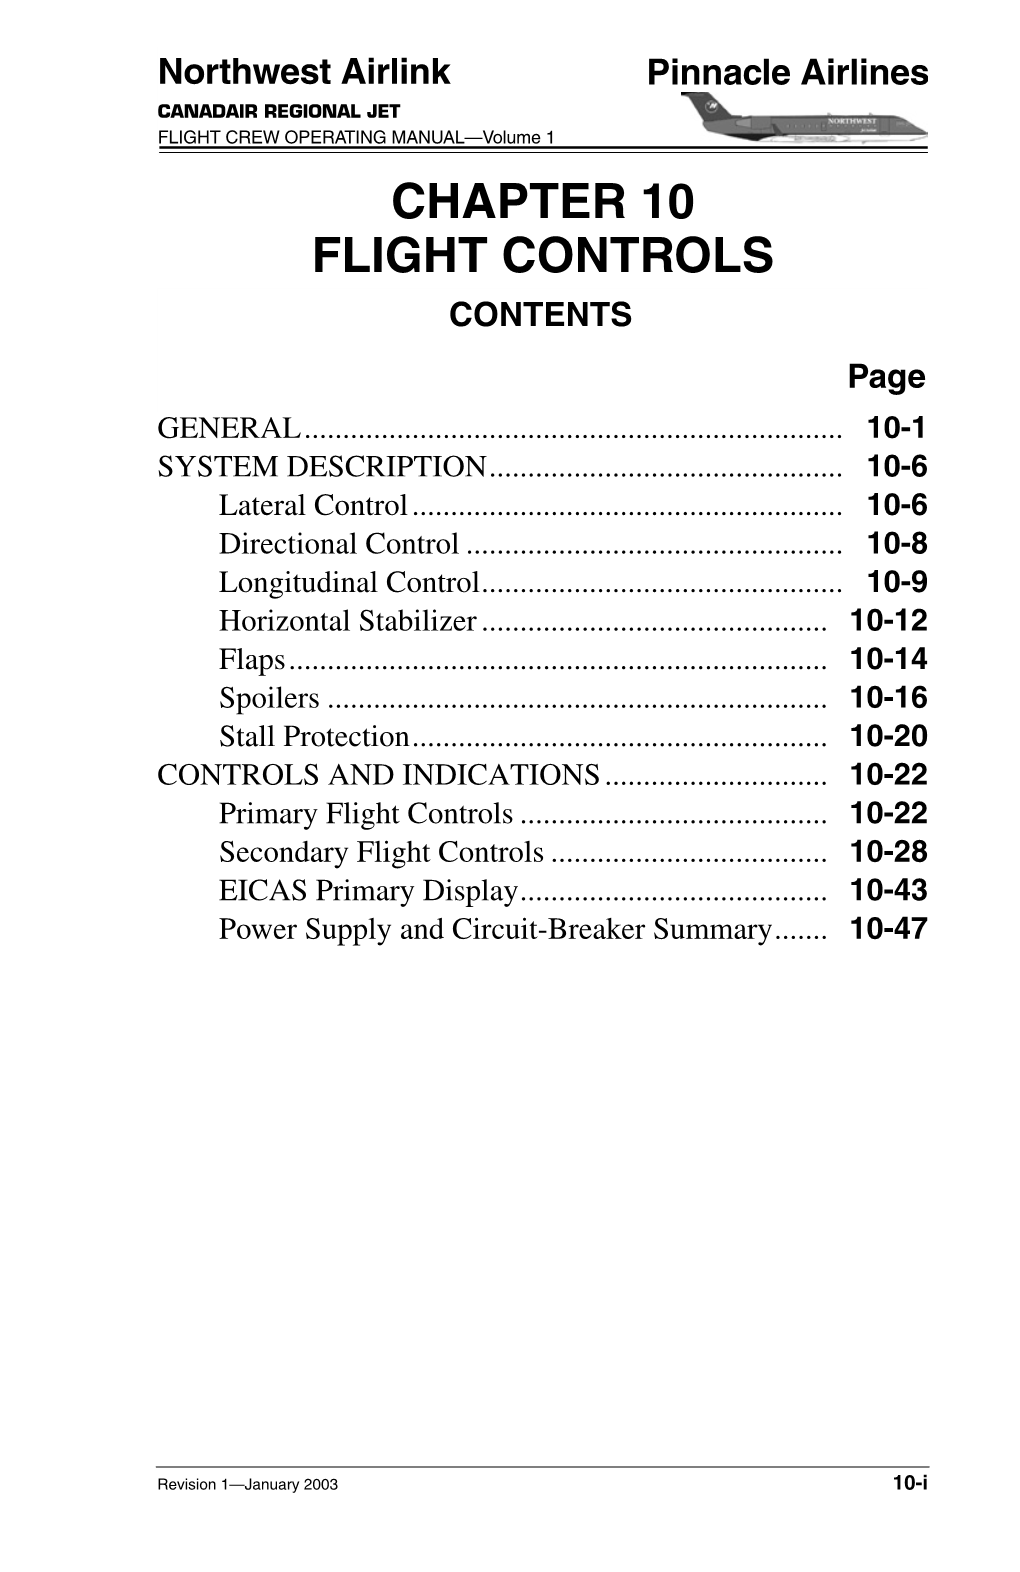 CHAPTER 10 FLIGHT CONTROLS CONTENTS Page GENERAL